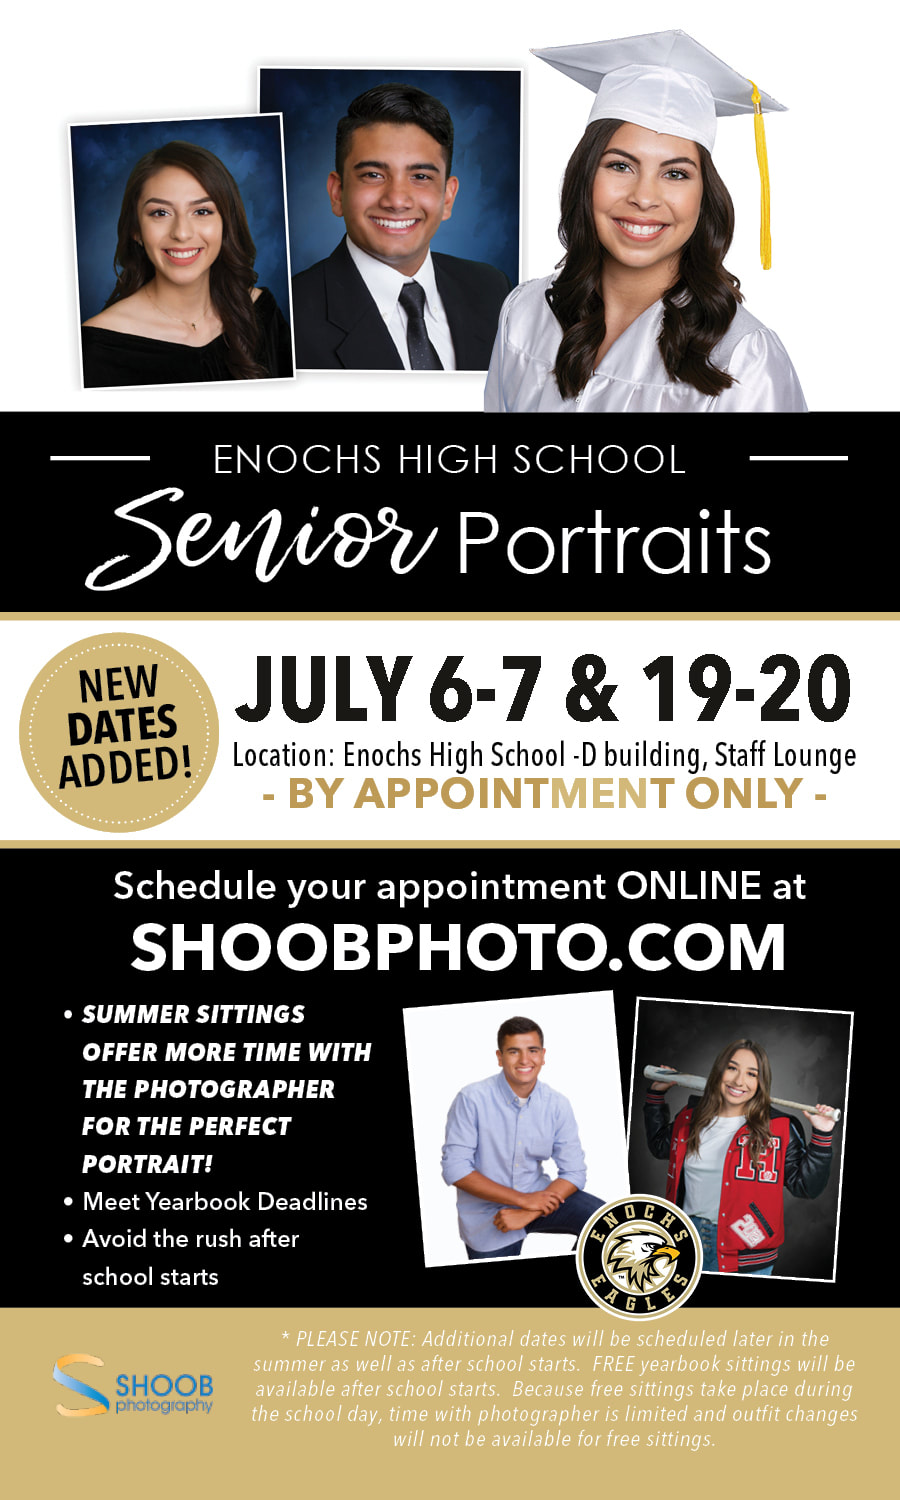 ✶ JCPenney Portraits by Lifetouch ✶ — Seasonal Photography Session Deals -  Up To 89% Off